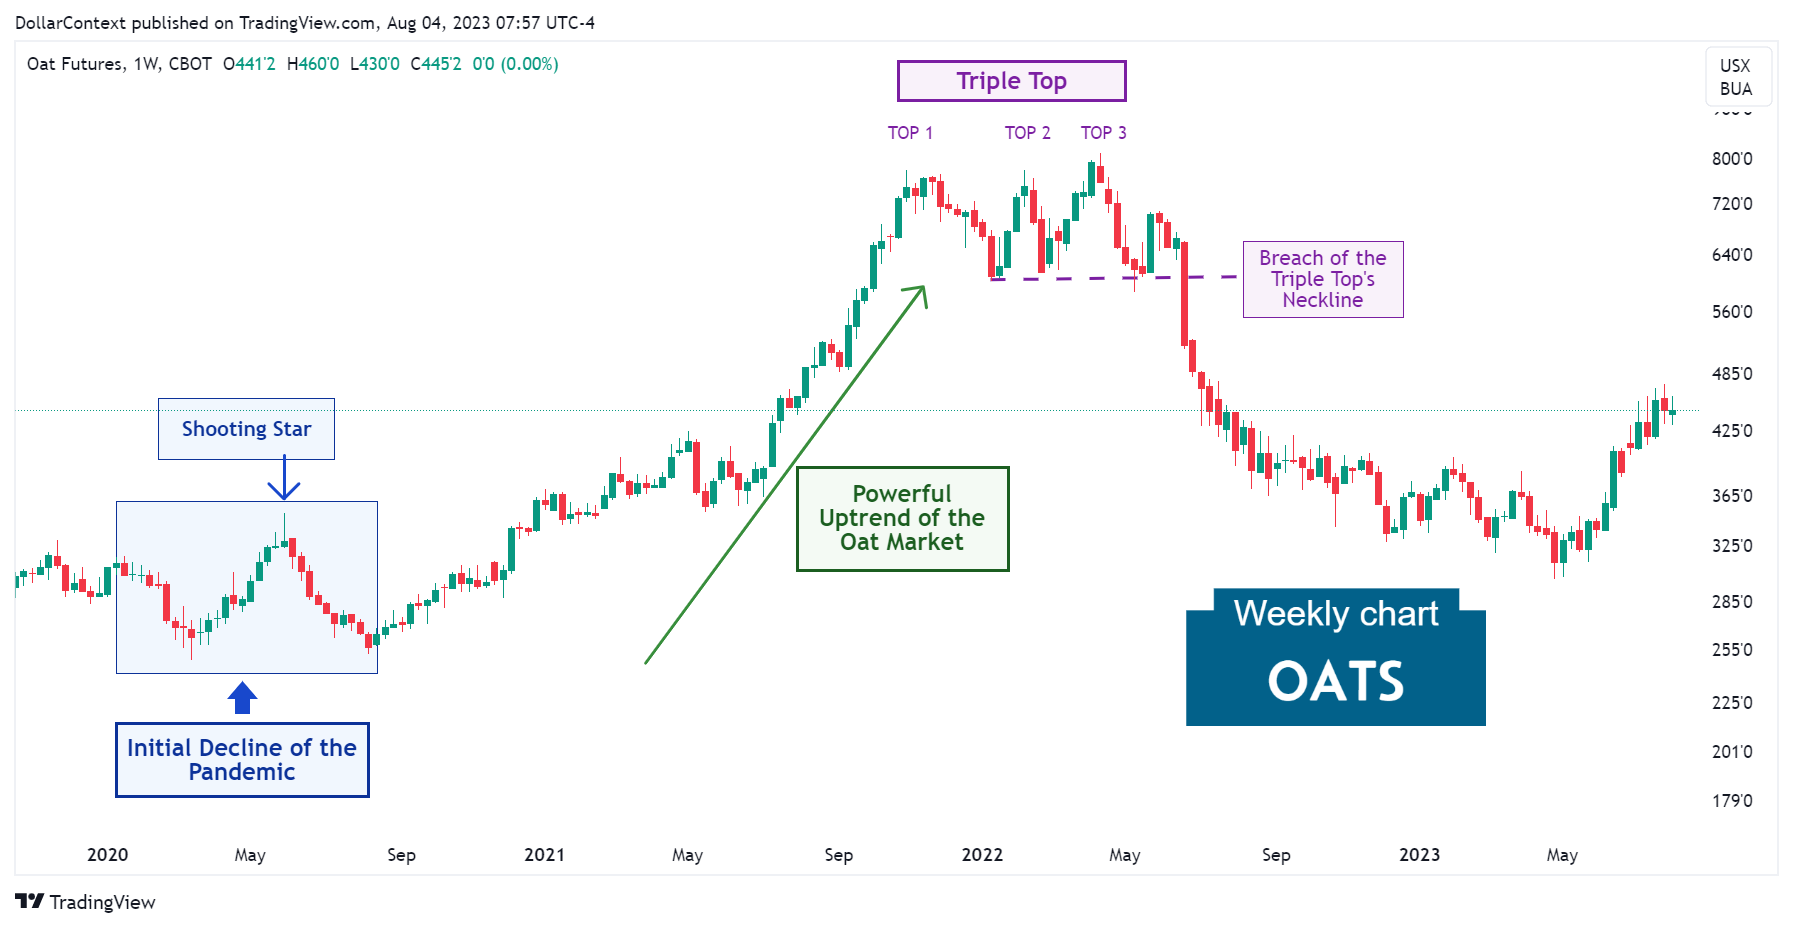 Oat Futures: Triple Top Formation